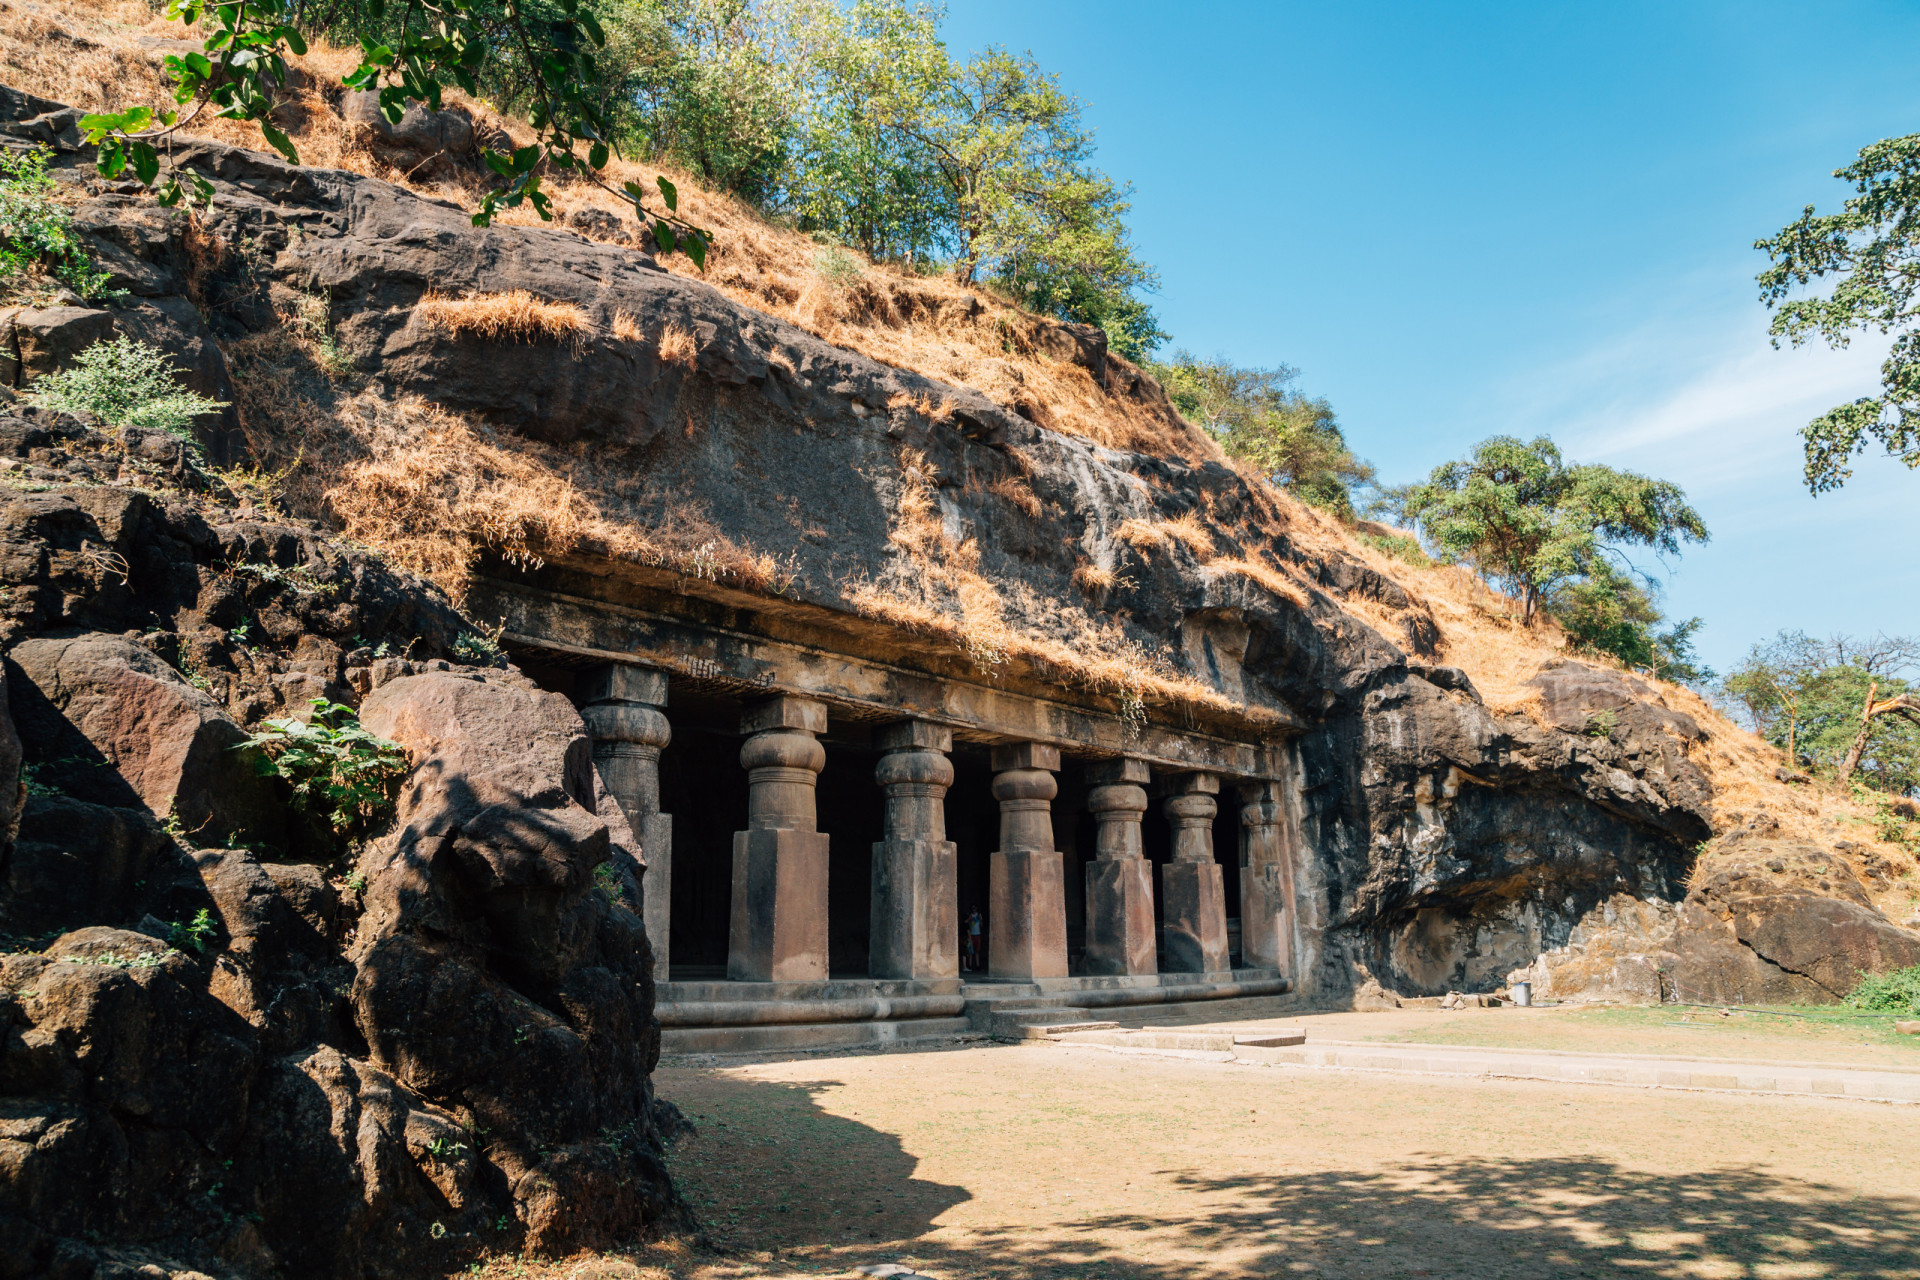 <p>UNESCO inscribed the ancient rock caves on Elephanta Island as a World Heritage Site in 1987. The island, one of a number set in Mumbai Harbor, attracts numerous visitors eager to gaze upon the collection of cave temples dedicated to the Hindu god Shiva.</p><p><a href="https://www.msn.com/en-nz/community/channel/vid-7xx8mnucu55yw63we9va2gwr7uihbxwc68fxqp25x6tg4ftibpra?cvid=94631541bc0f4f89bfd59158d696ad7e">Follow us and access great exclusive content every day</a></p>